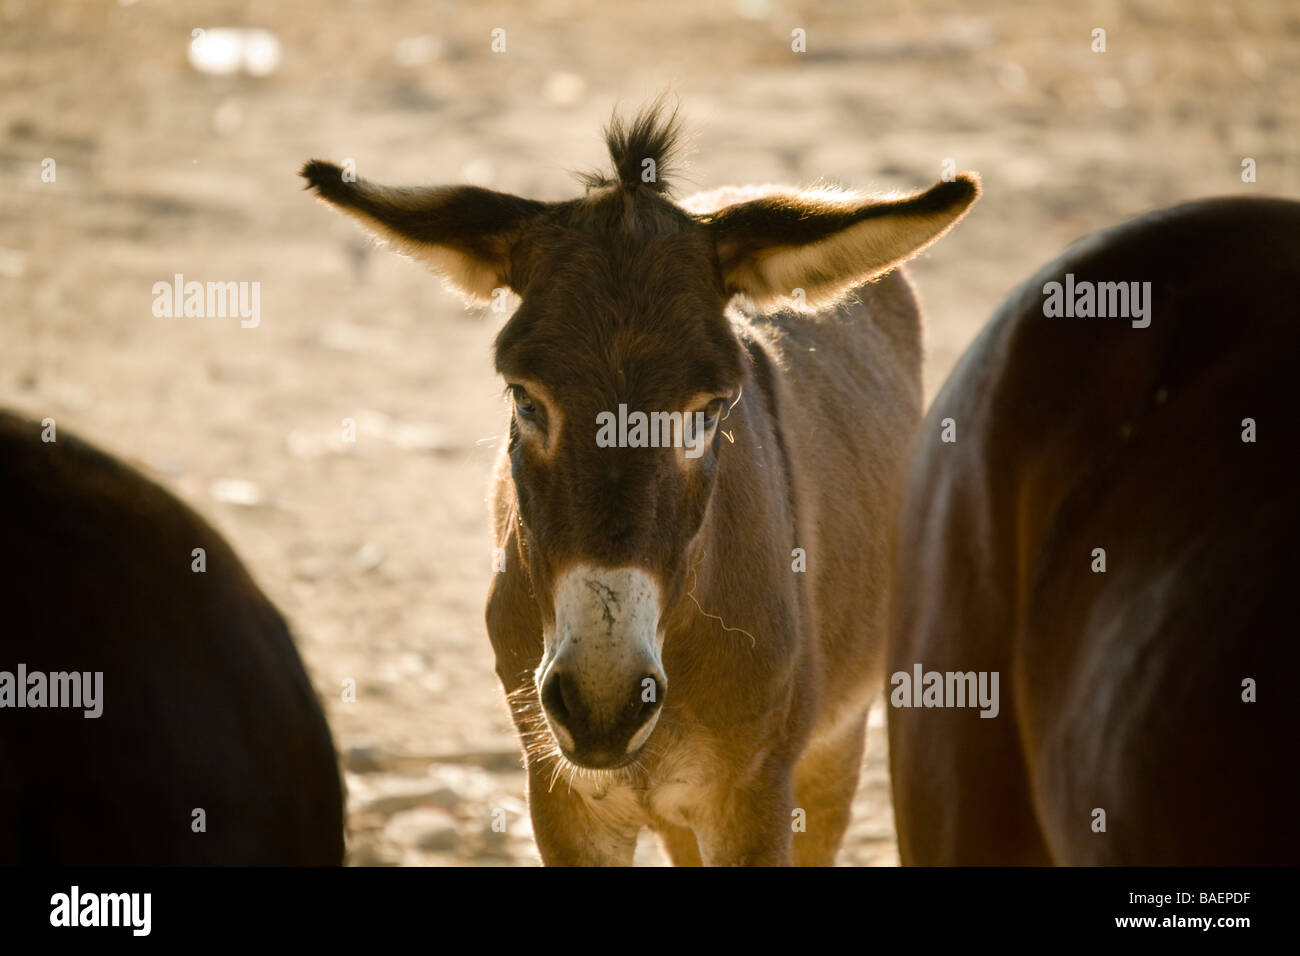 MEXICO Todos Santos Brown burro standing in dry and barren pasture Stock Photo